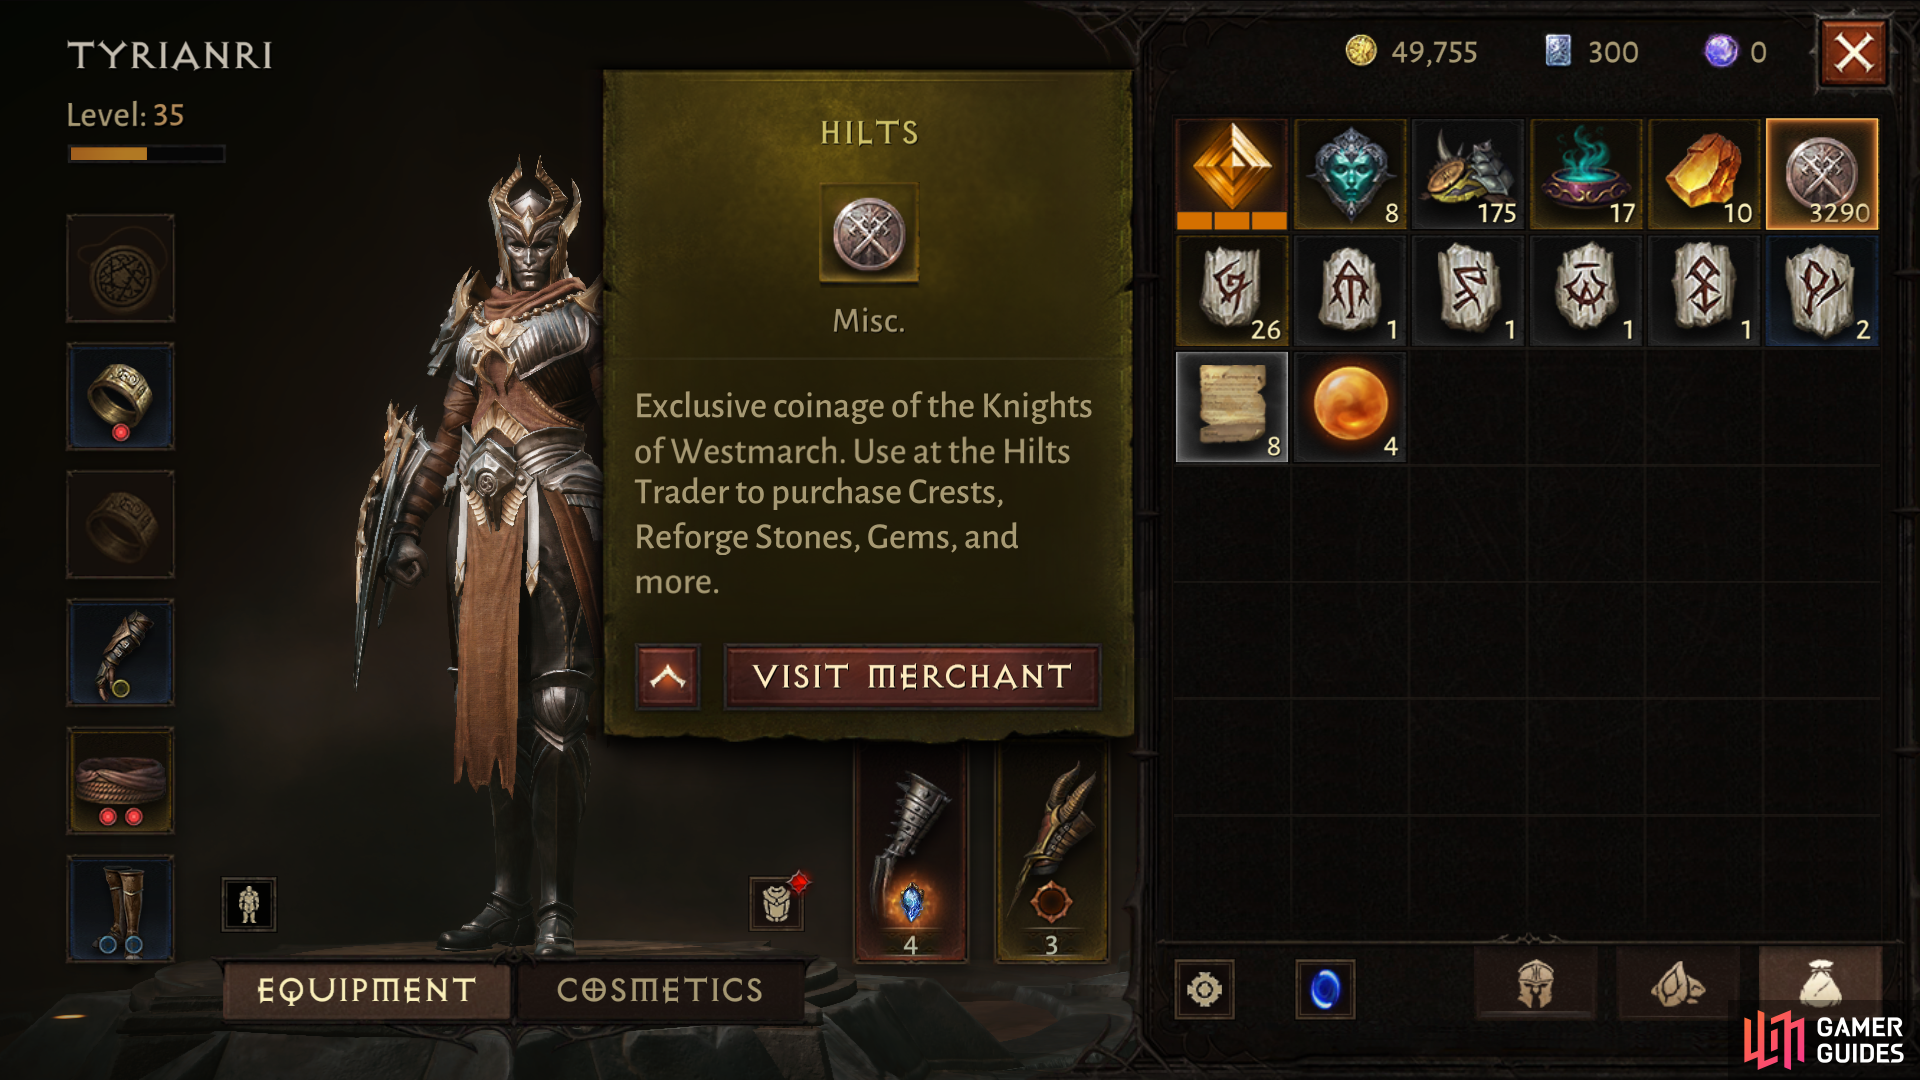 Hilts can be earned by ranking up your Battle Pass and completing Achievements.